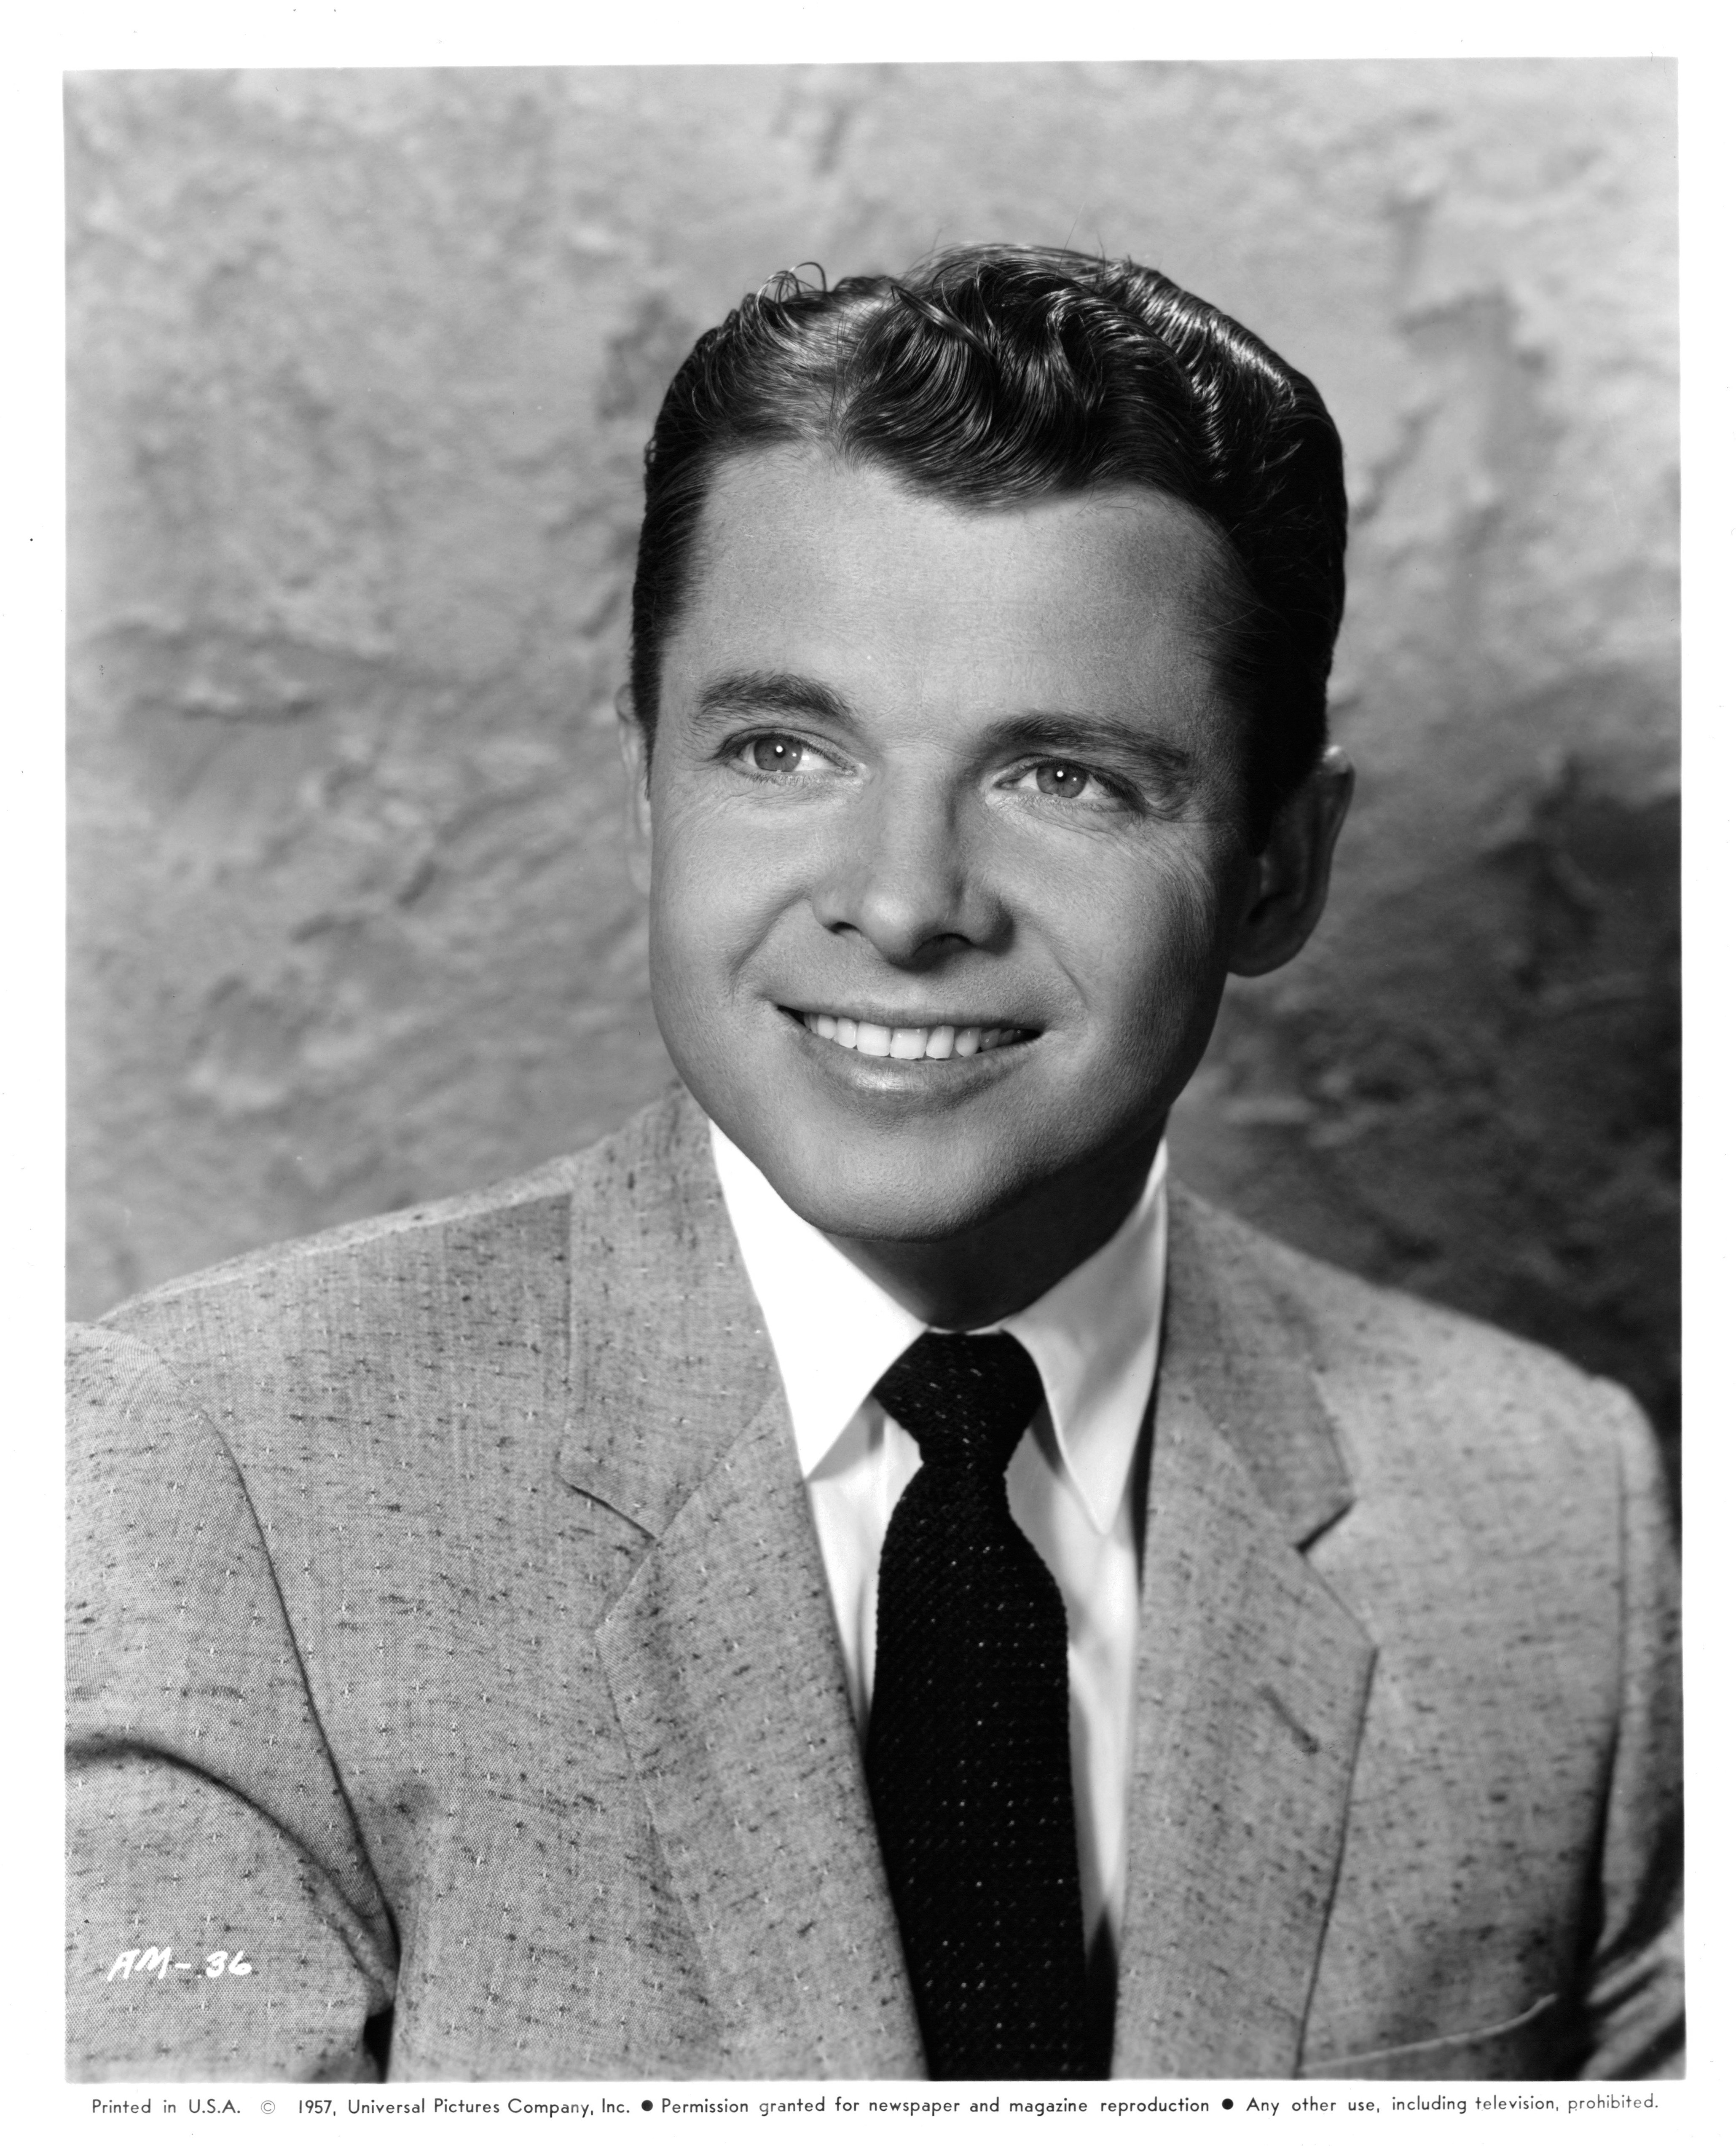 Actor Audie Murphy poses for a portrait in circa 1957.| Source : Getty Images